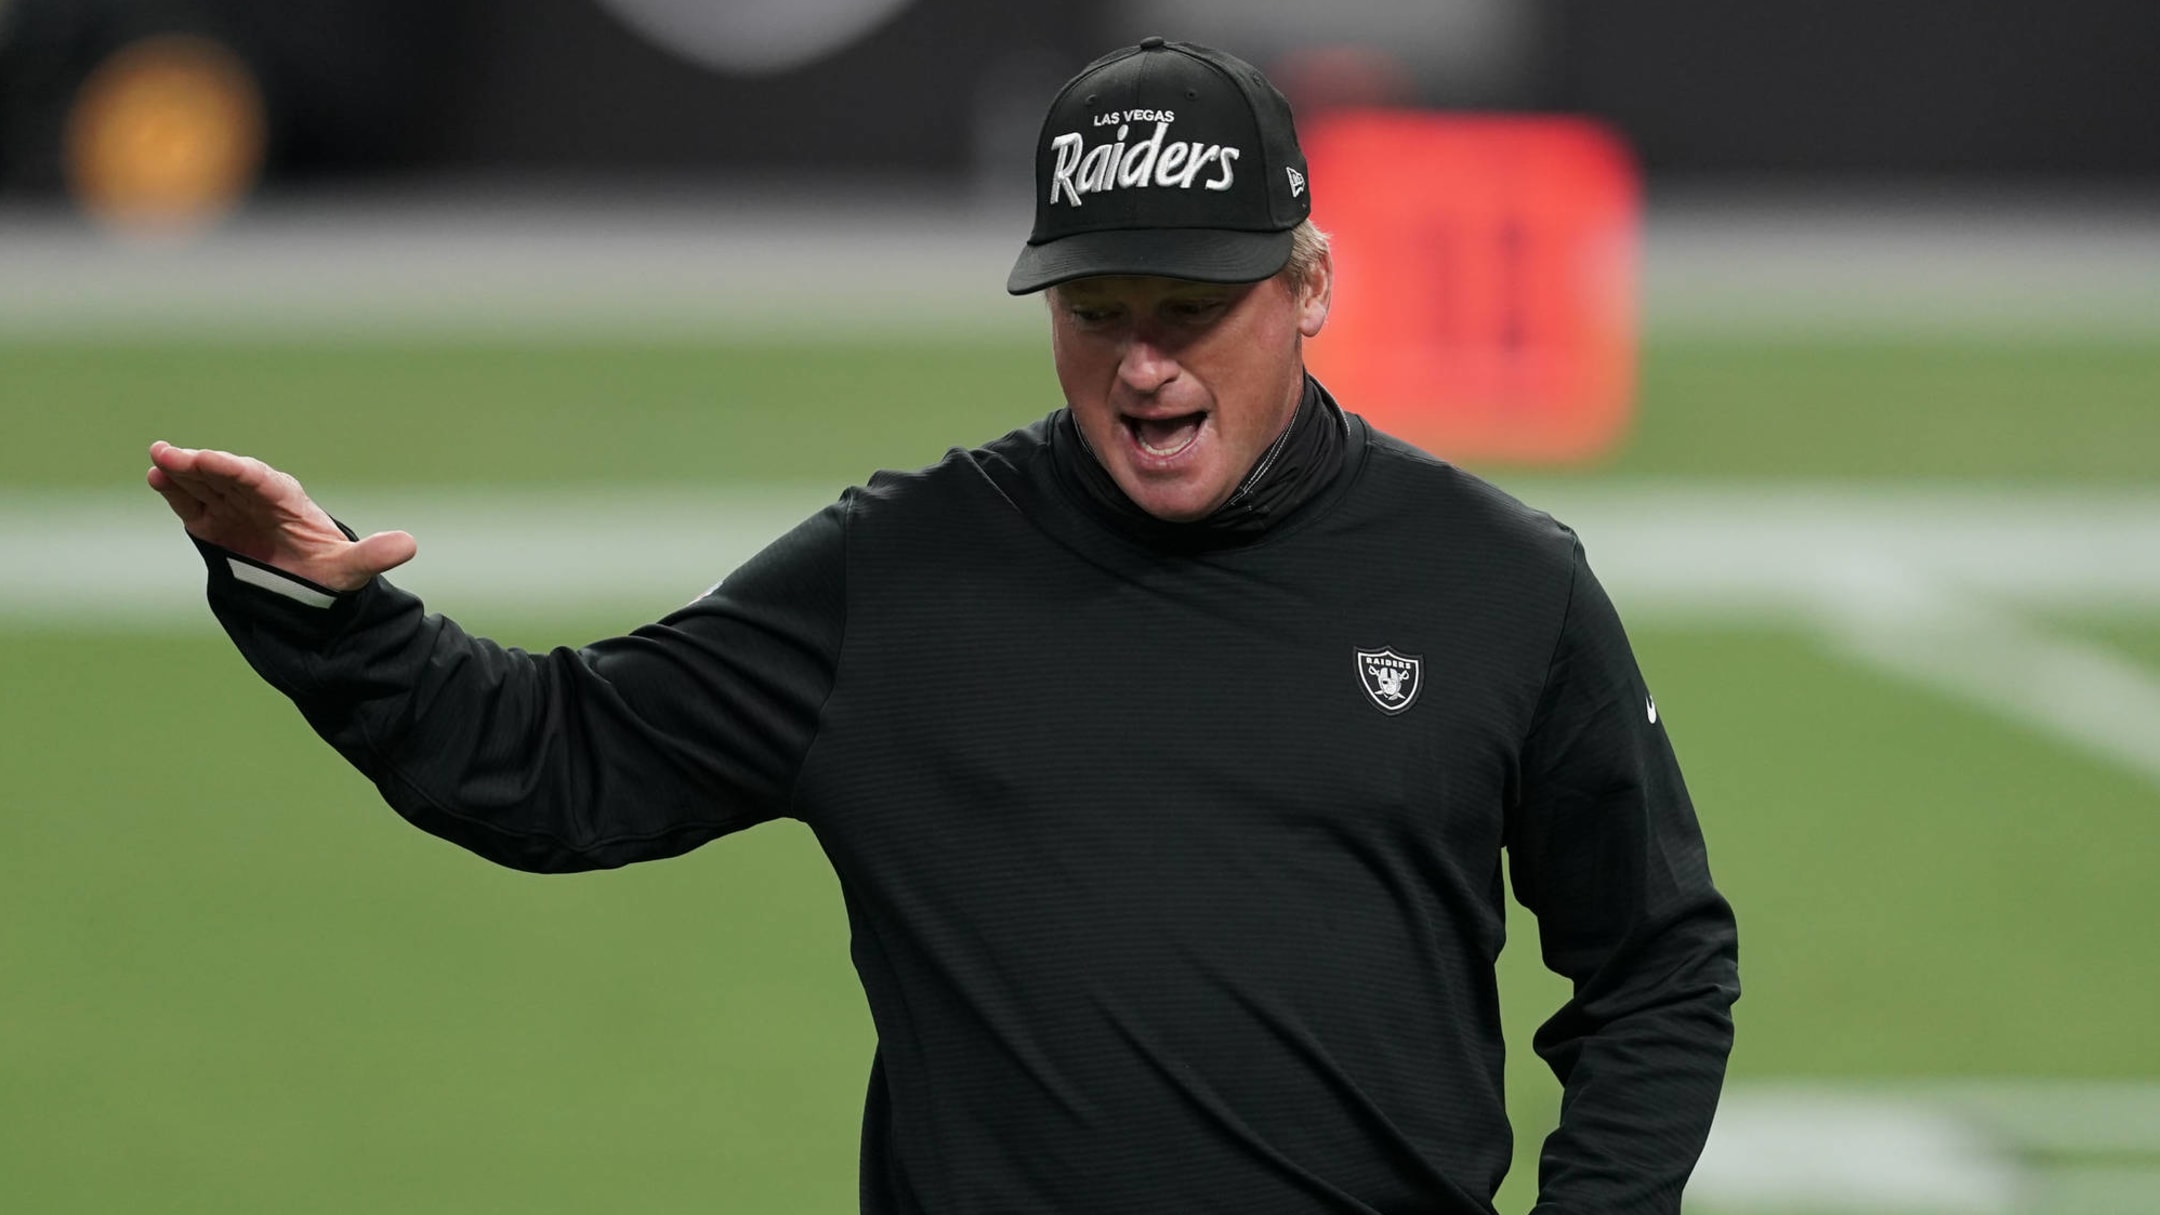 Photo: Jon Gruden's Hat For Tonight's Game Going Viral - The Spun